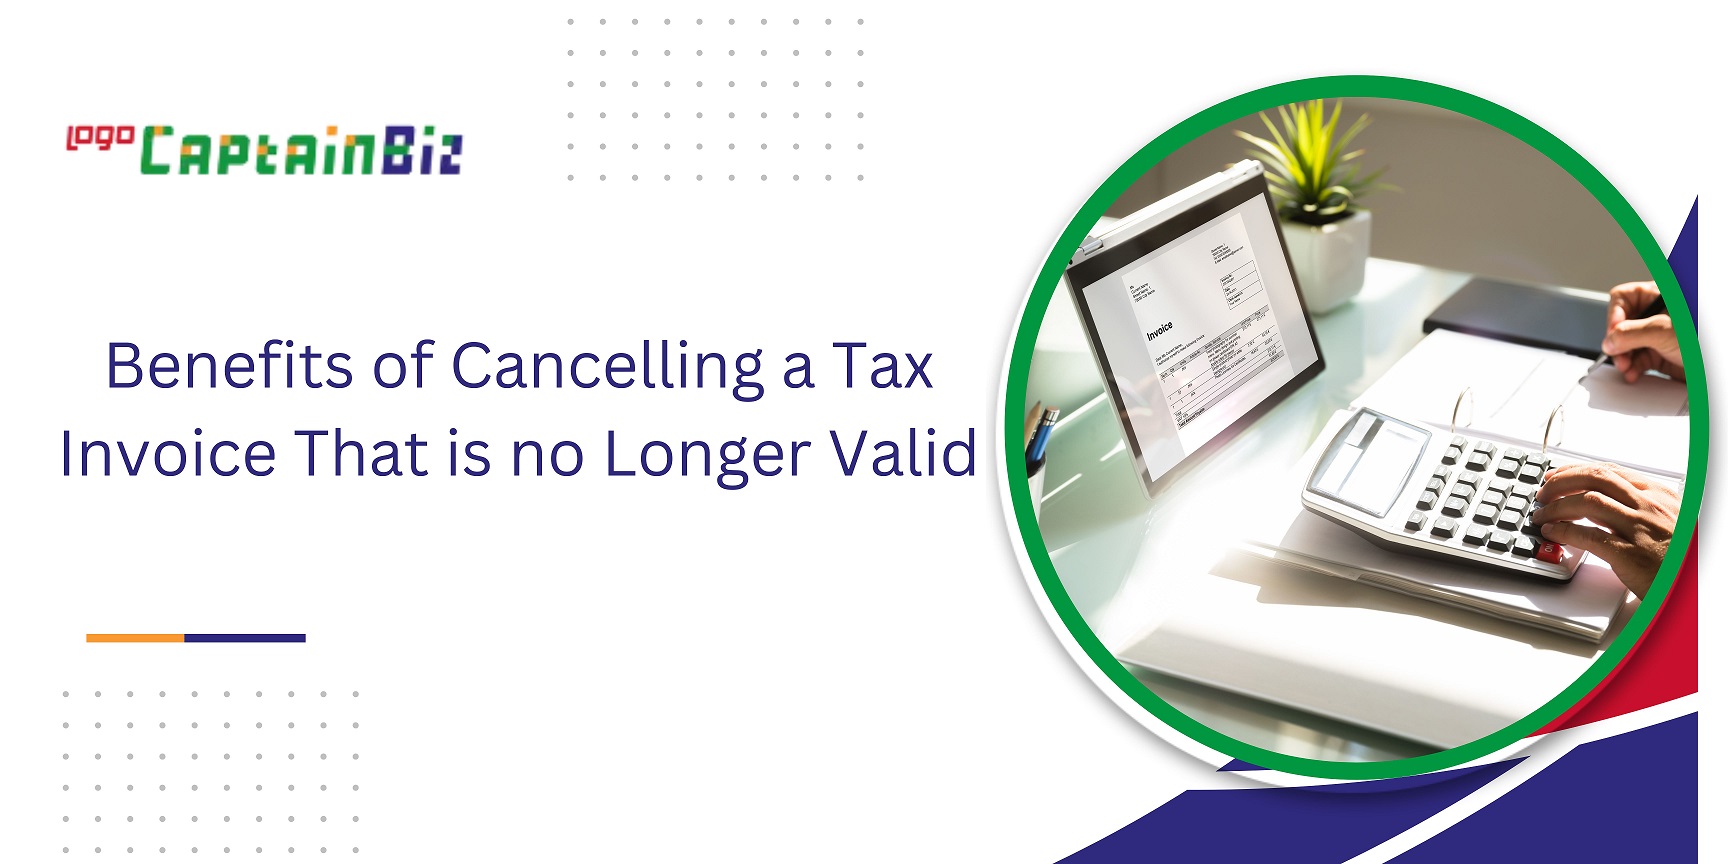 captainbiz benefits of cancelling a tax invoice that is no longer valid